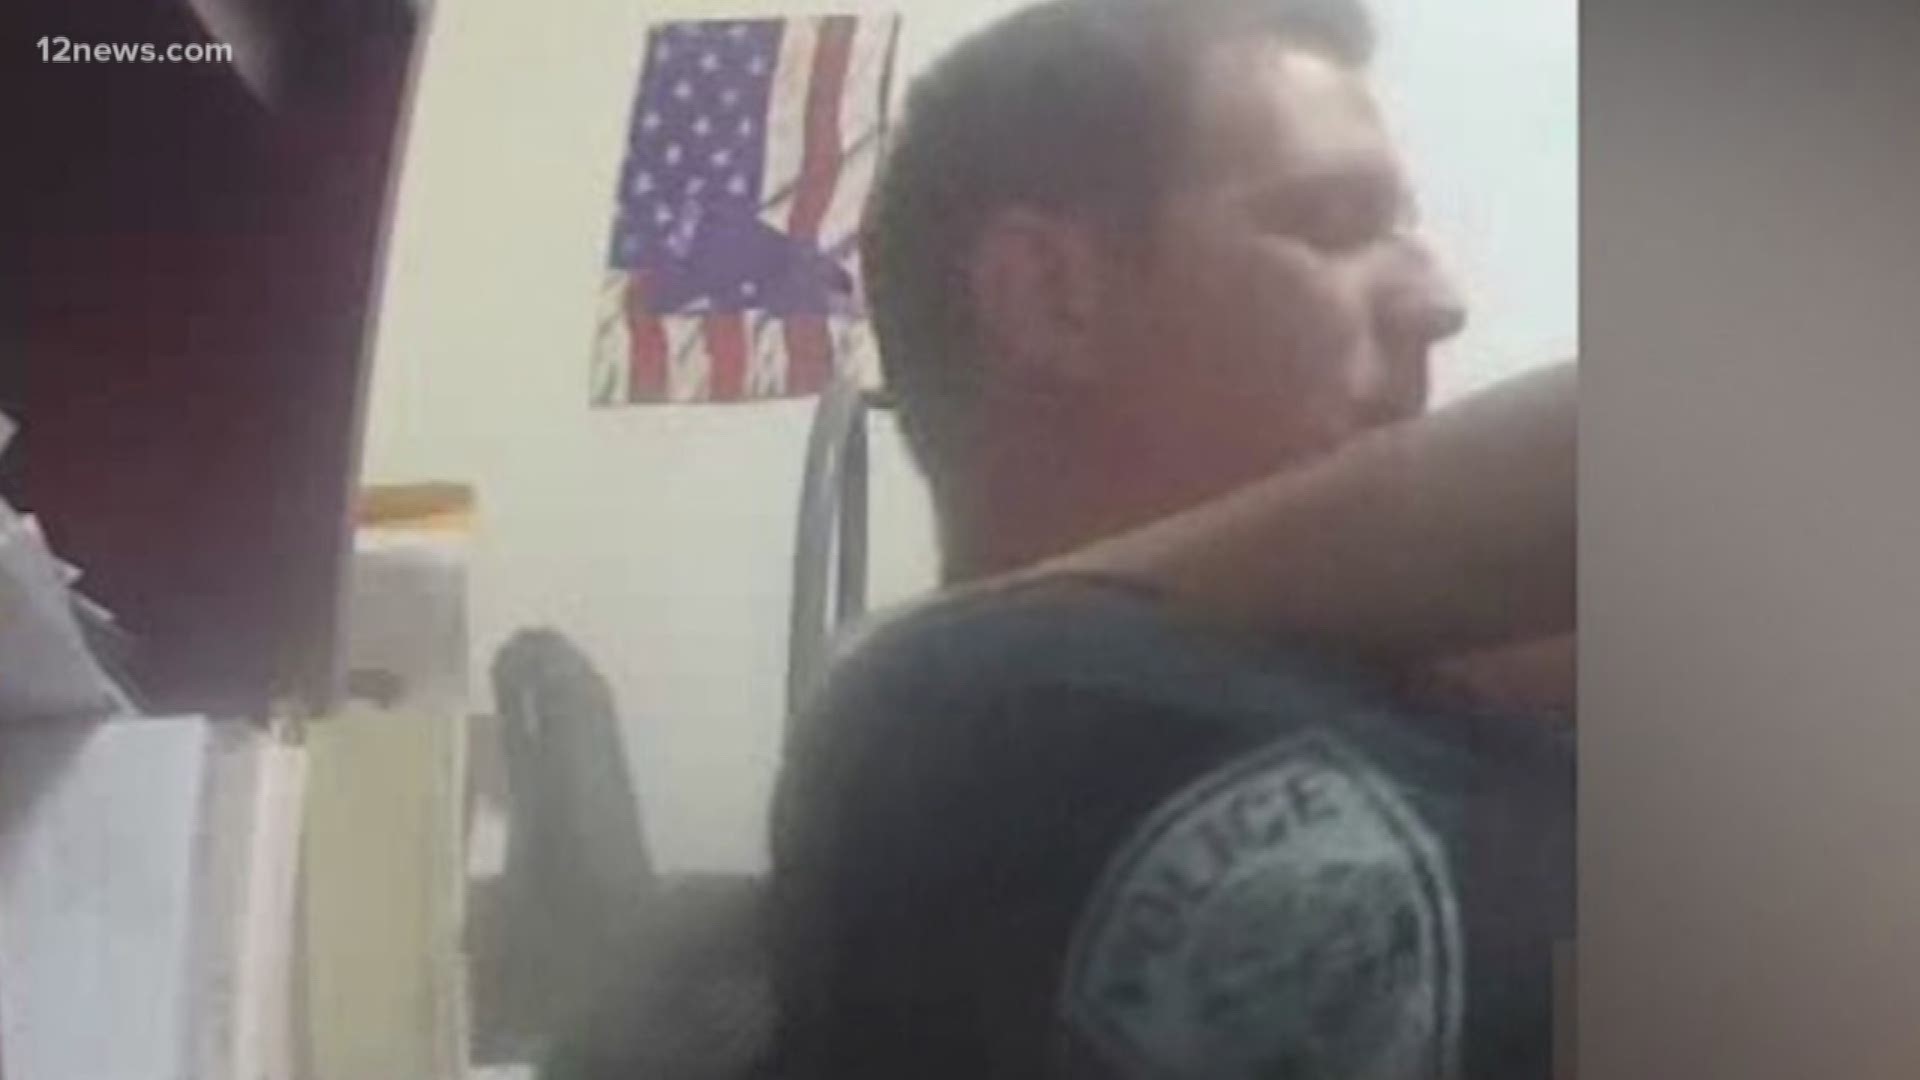 Video shows Anthony Doran, a Superior police sergeant, turning on his department-issued body camera and pointing it towards himself before engaging in sexual activity with a woman in his office. A still image of a naked, underage girl was also found.